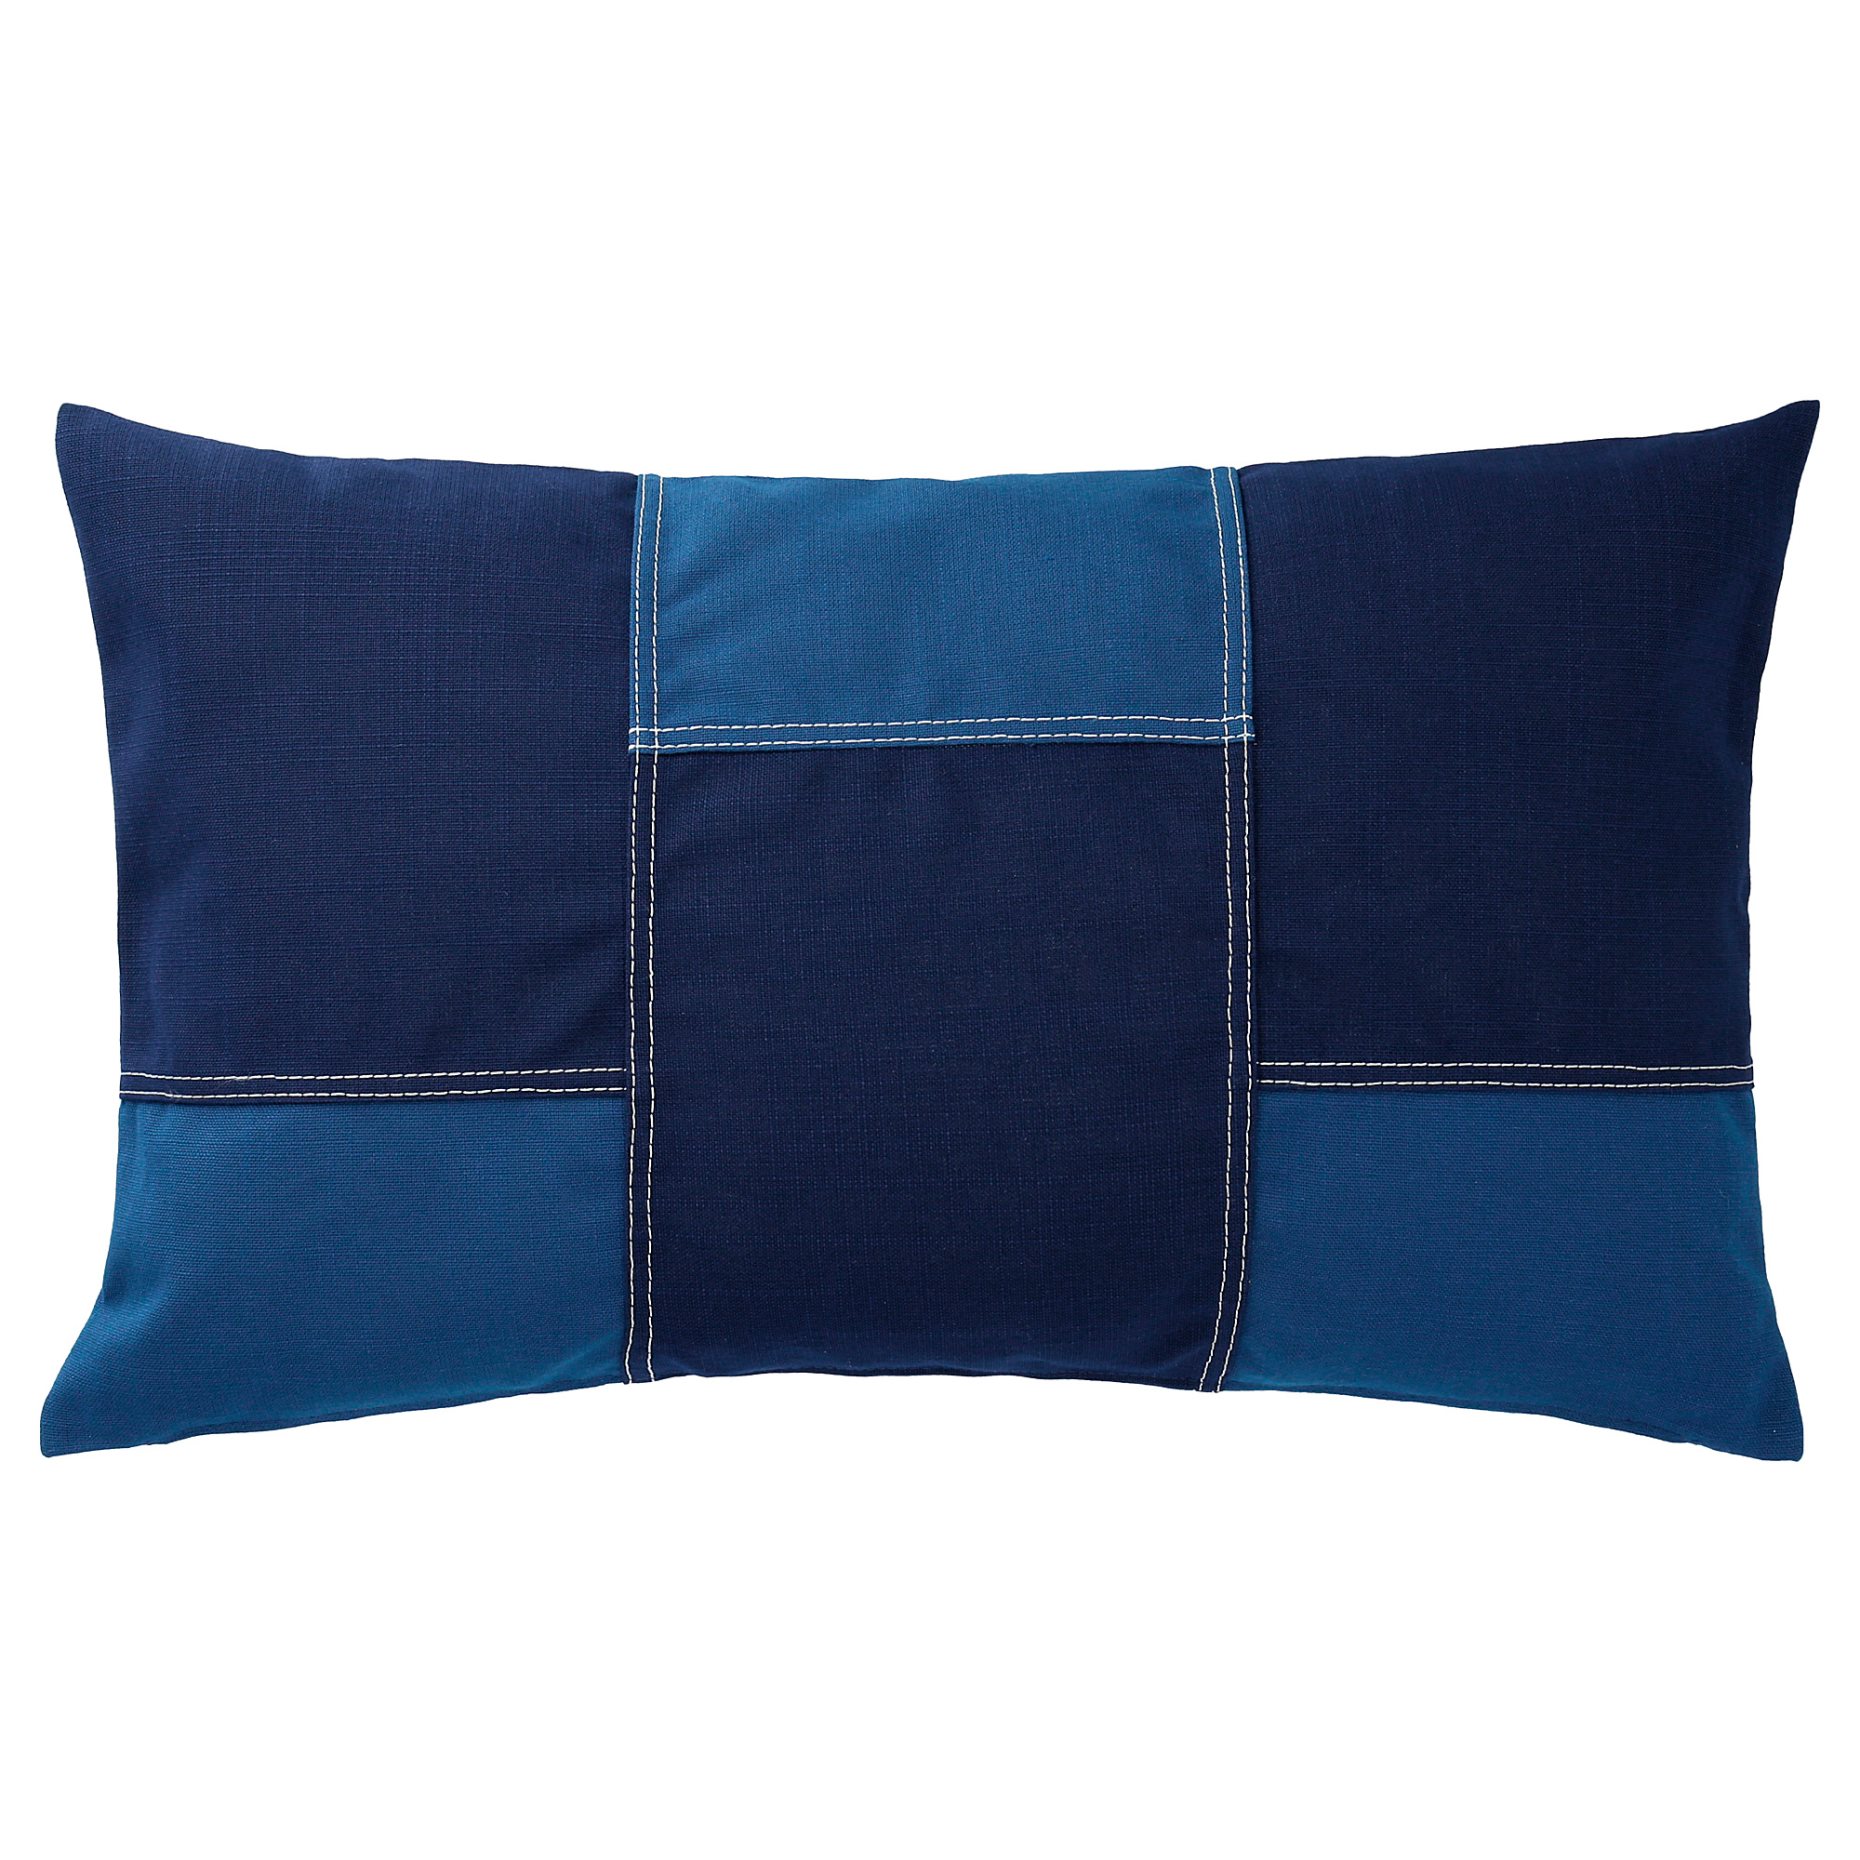 FESTHOLMEN, cushion cover, in/outdoor, 704.385.83